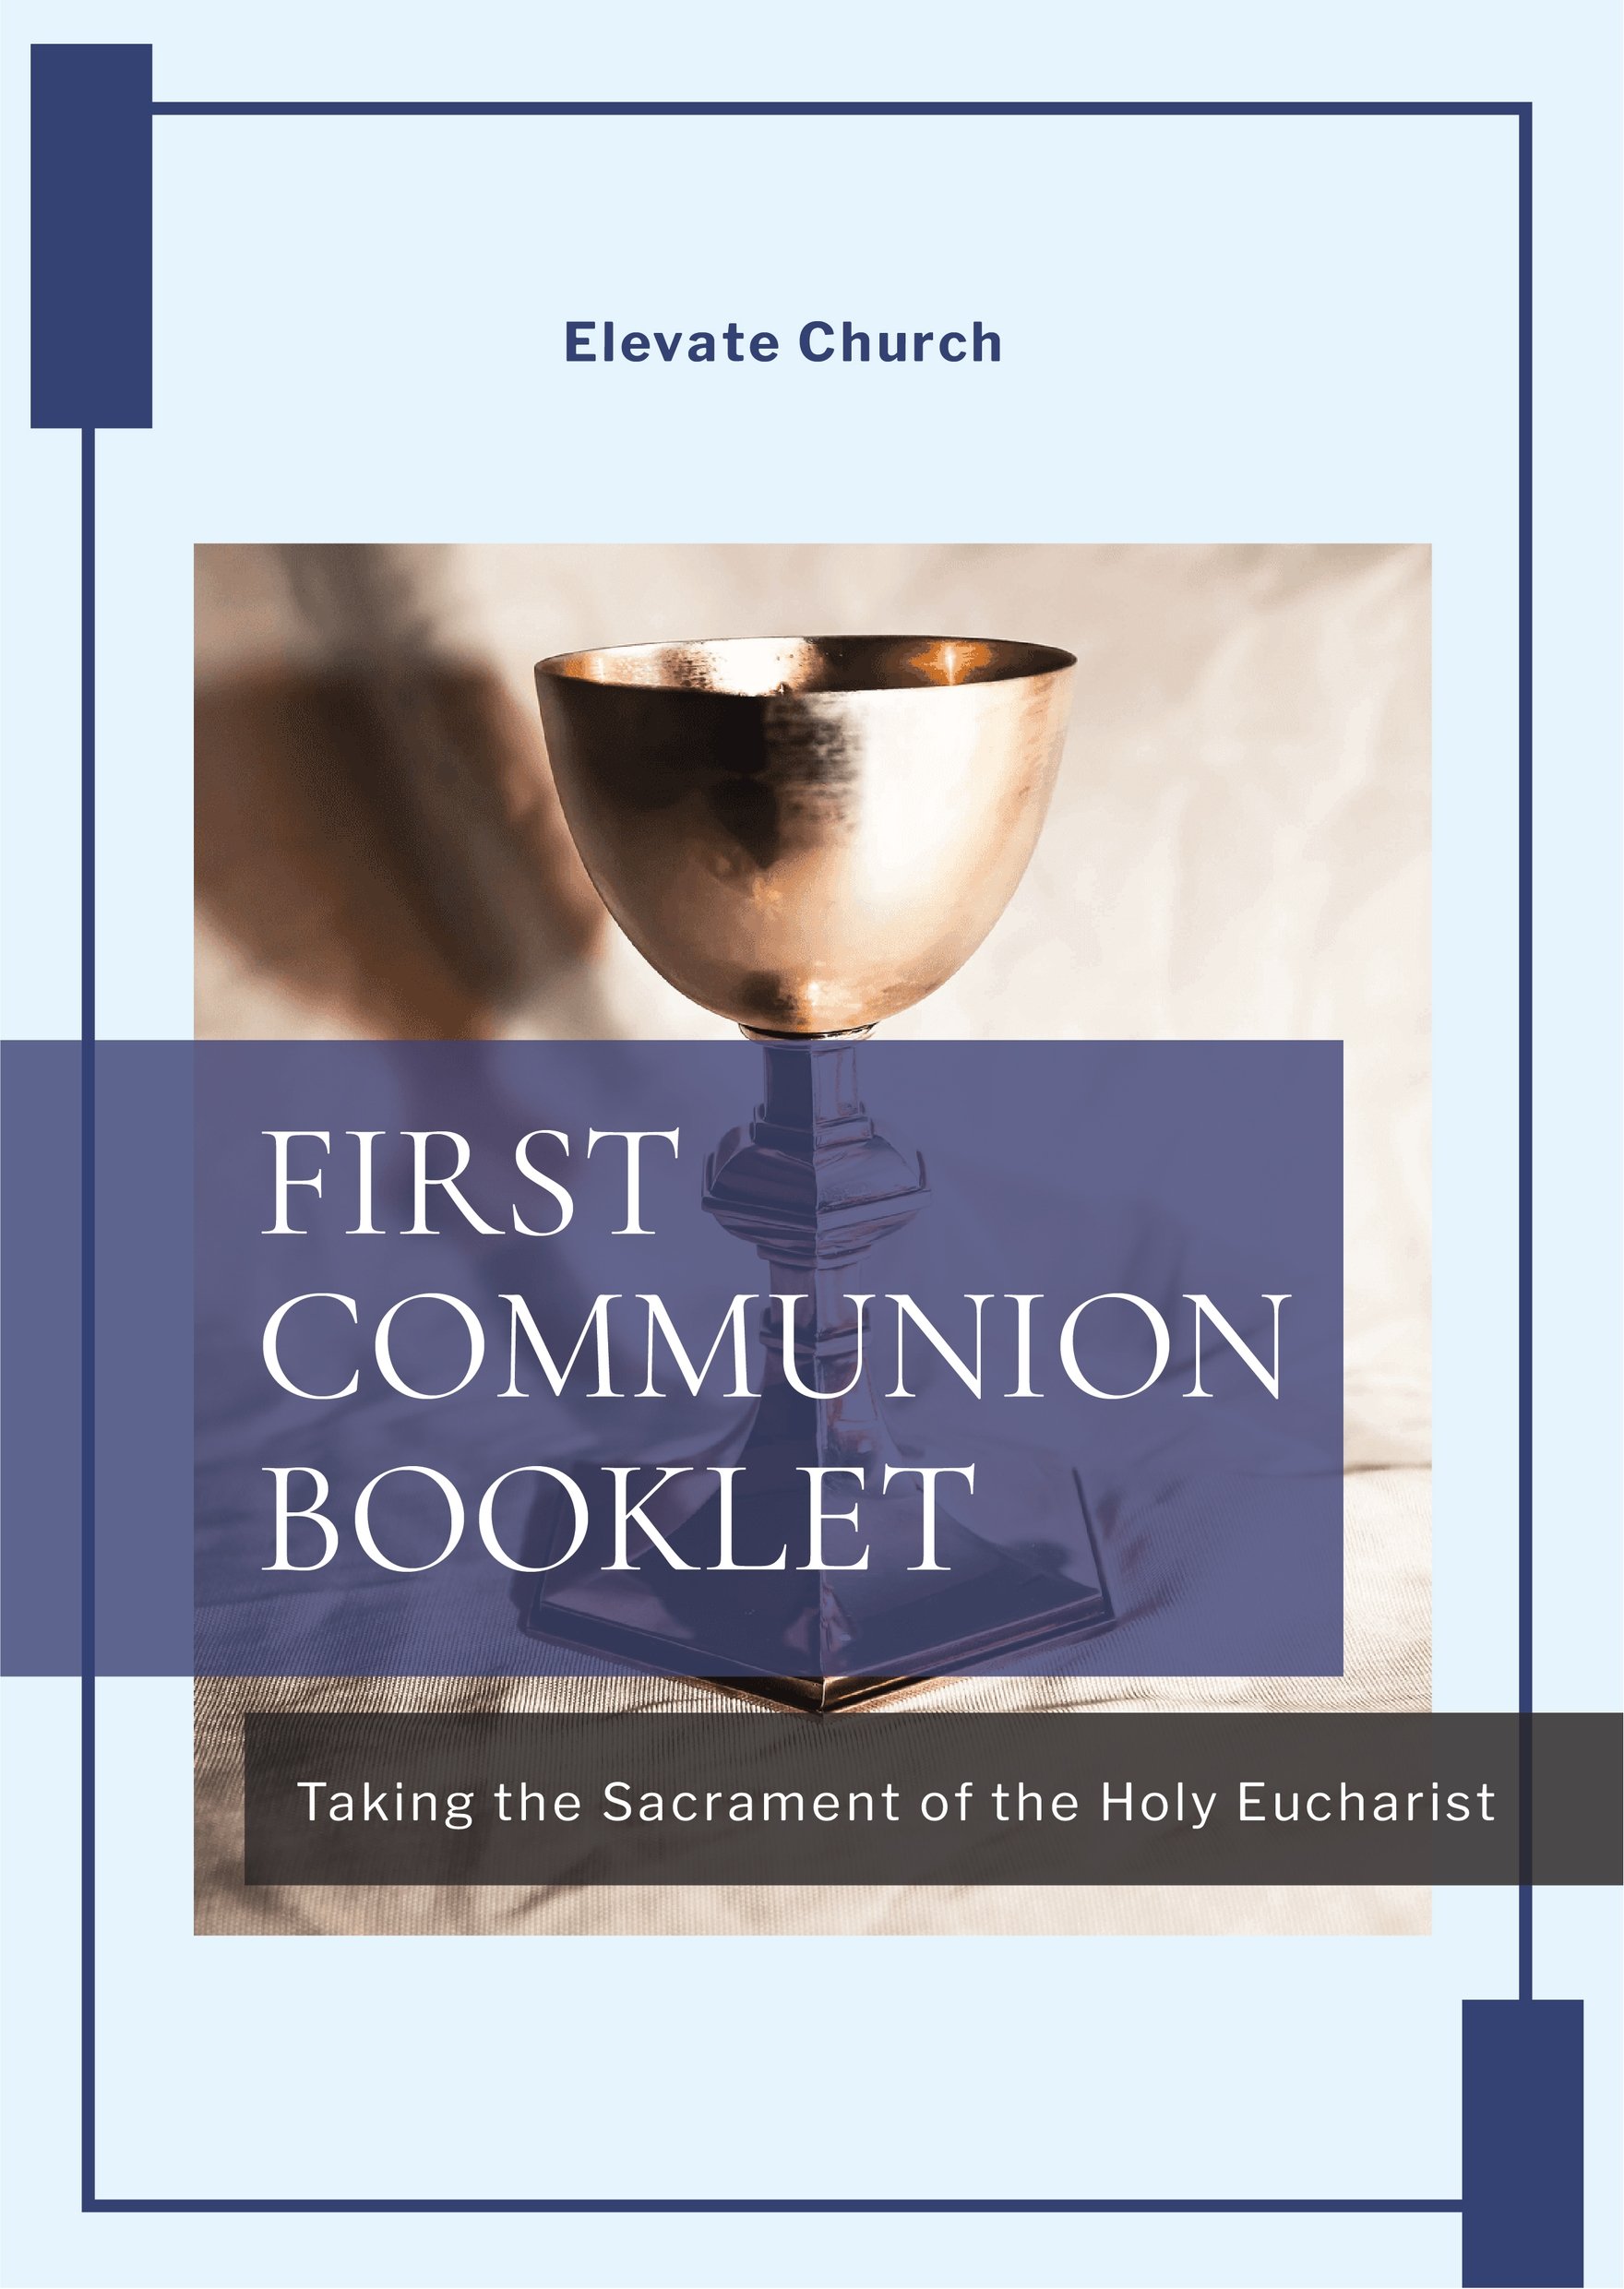 first-communion-booklet-template-download-in-word-google-docs-illustrator-psd-apple-pages